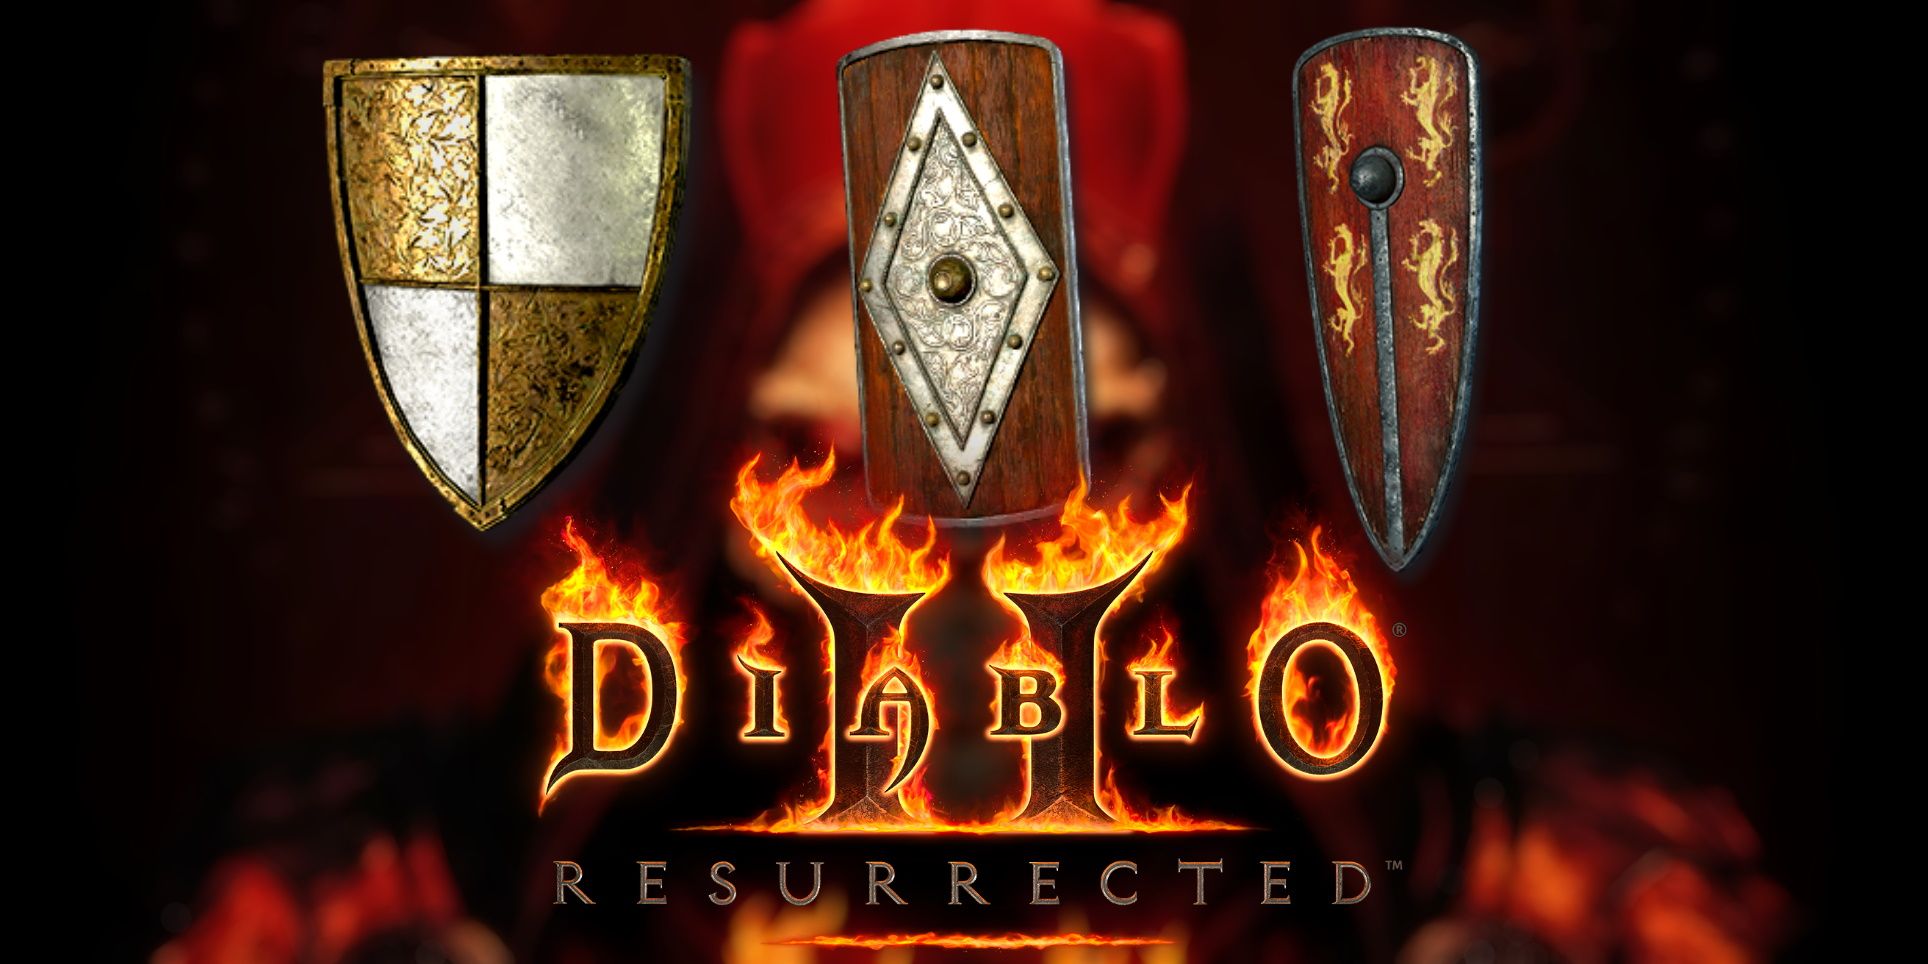 diablo 2 what would a 4 socketed royal shield go for?